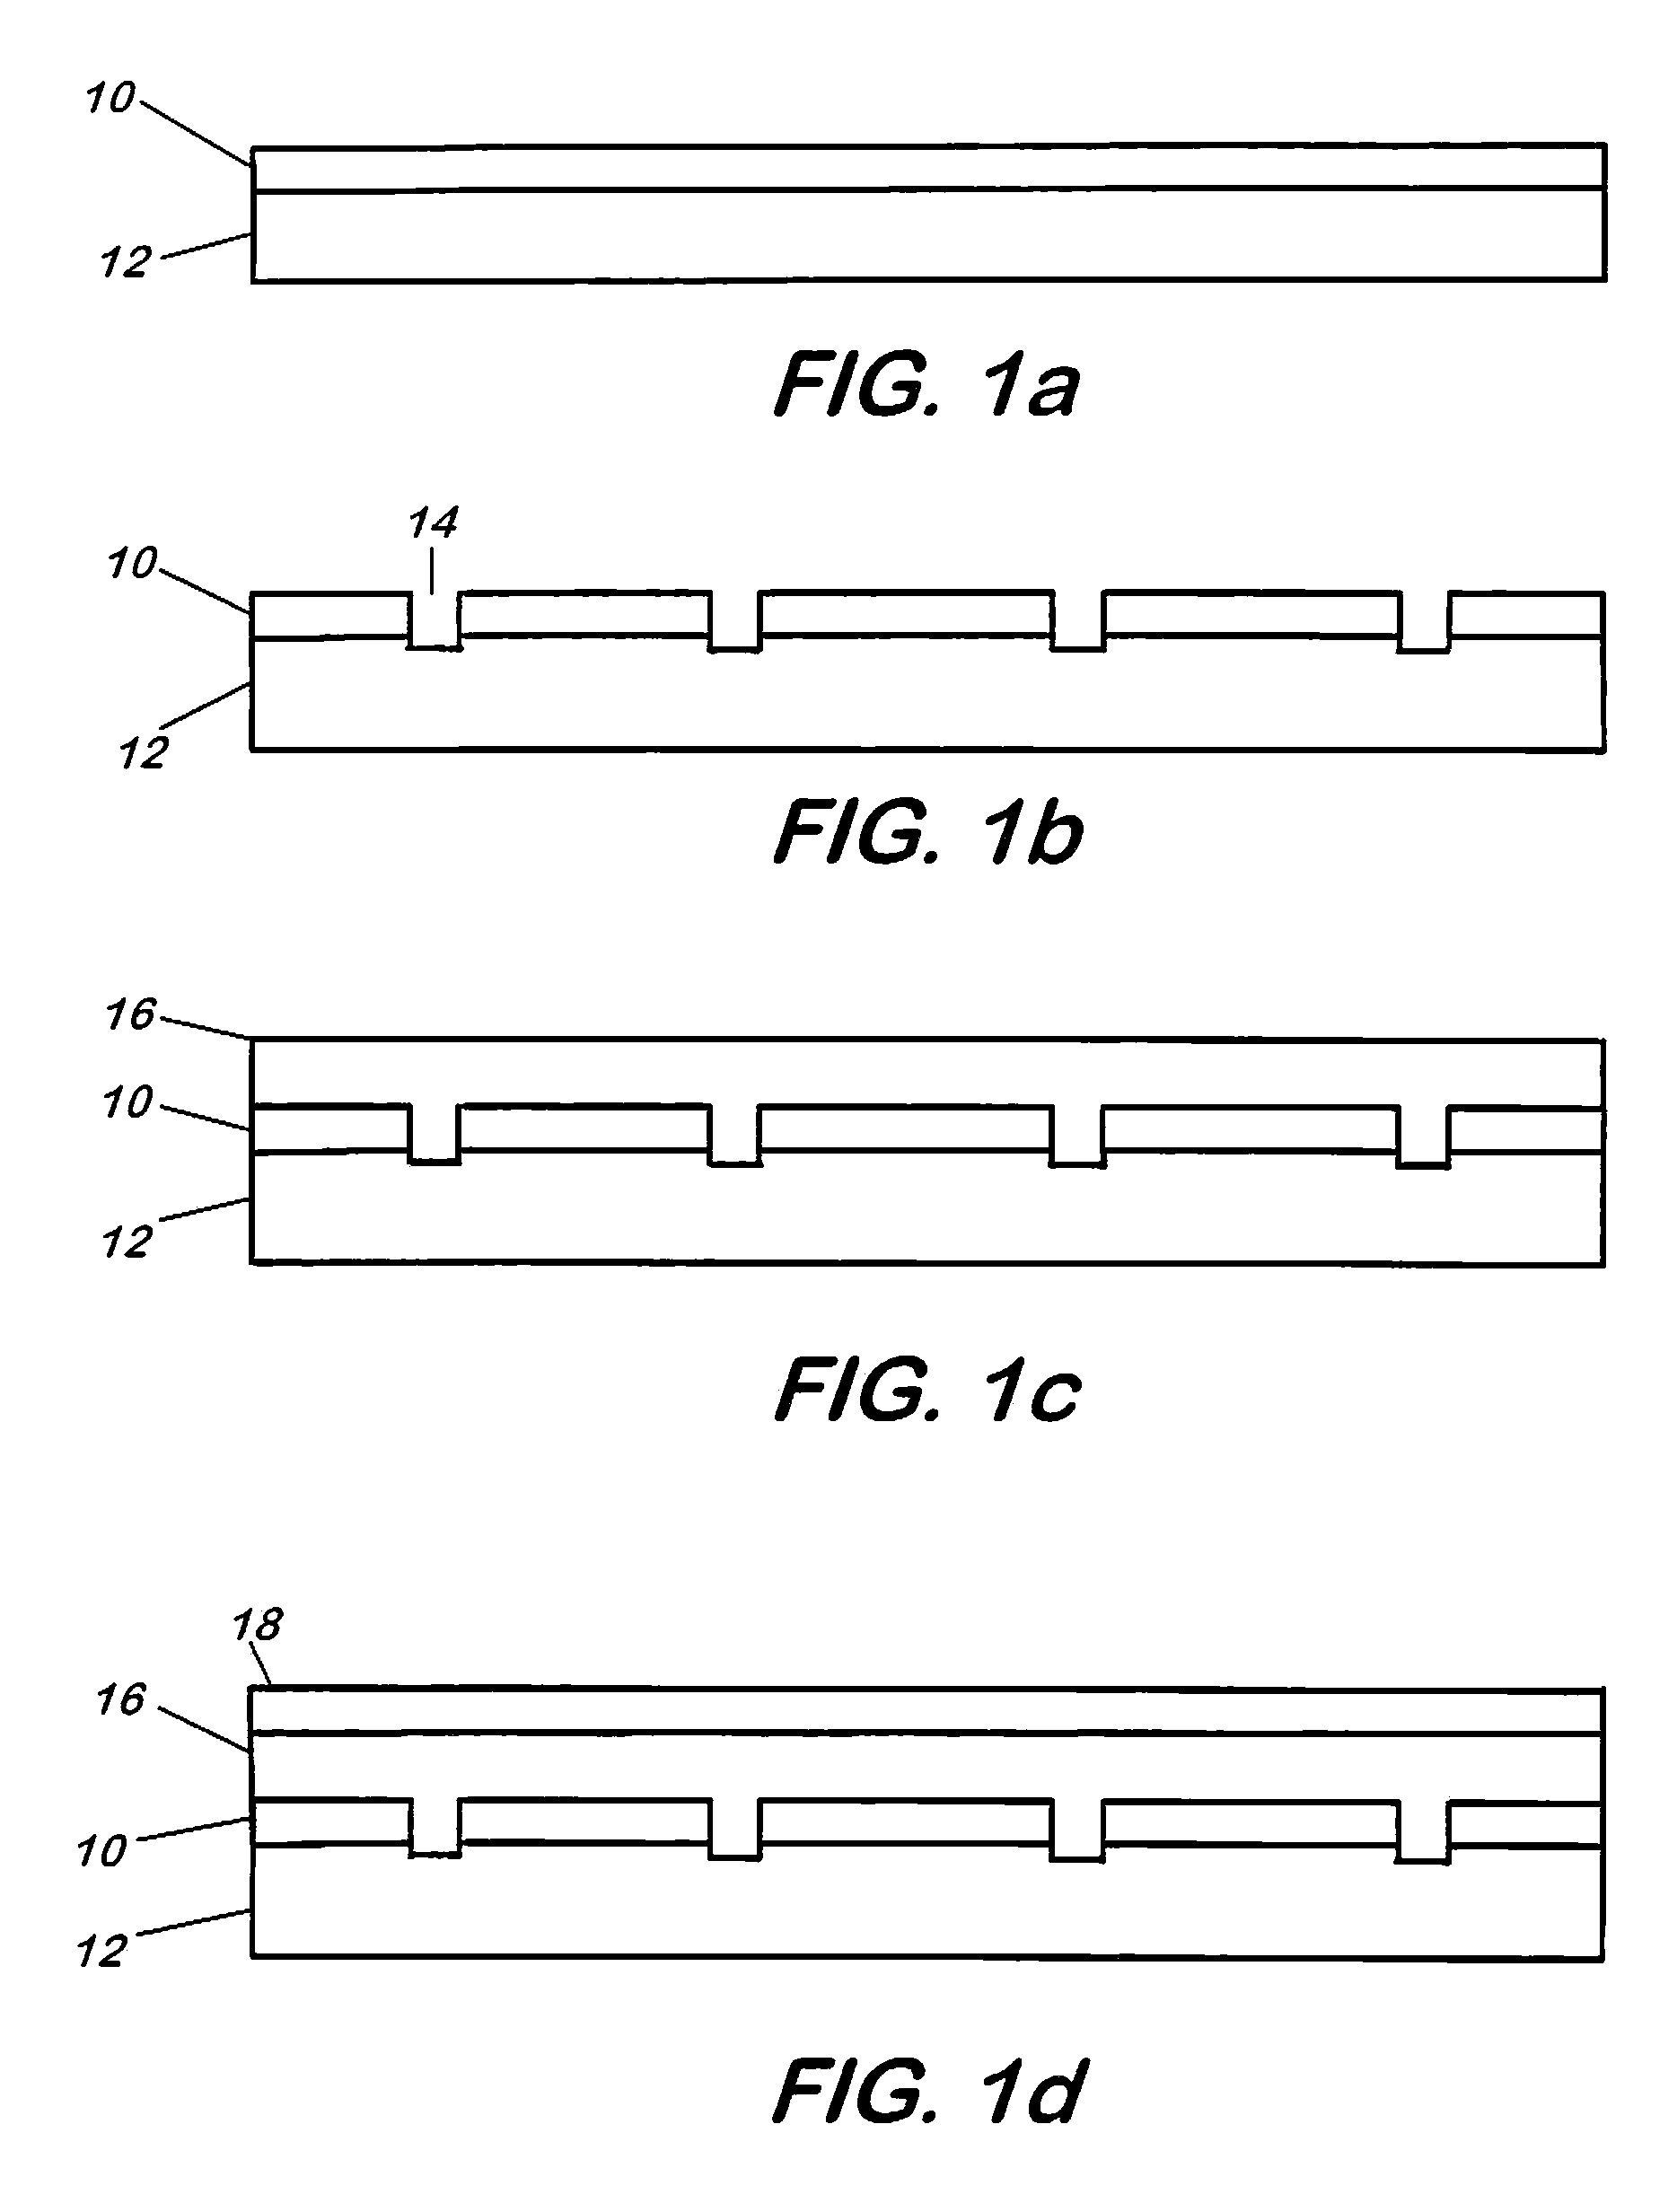 Wafer bonding of thinned electronic materials and circuits to high performance substrate